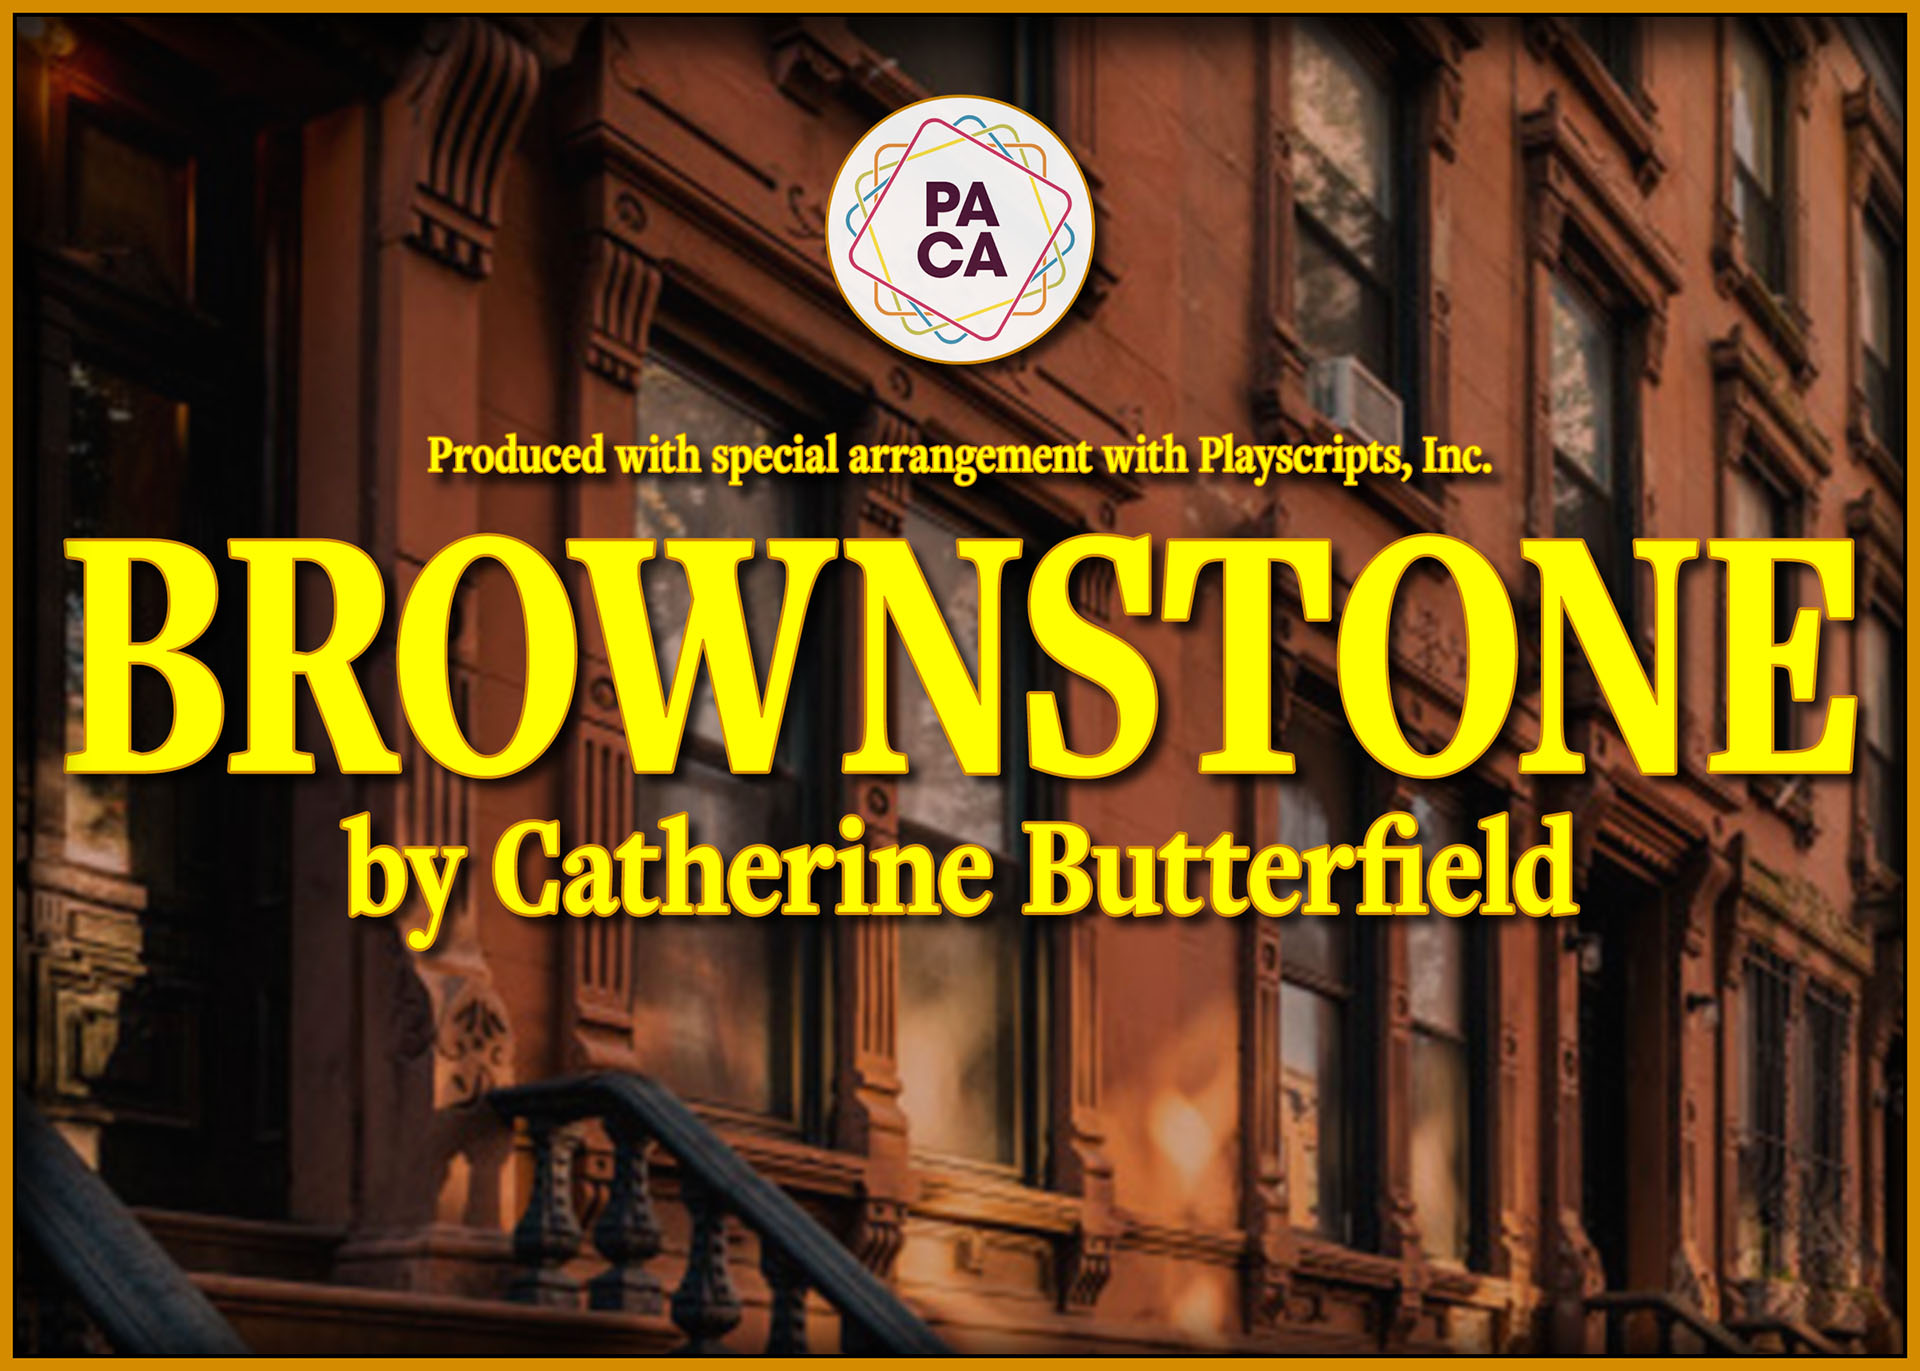 BROWNSTONE by Catherine Butterfield - PACA